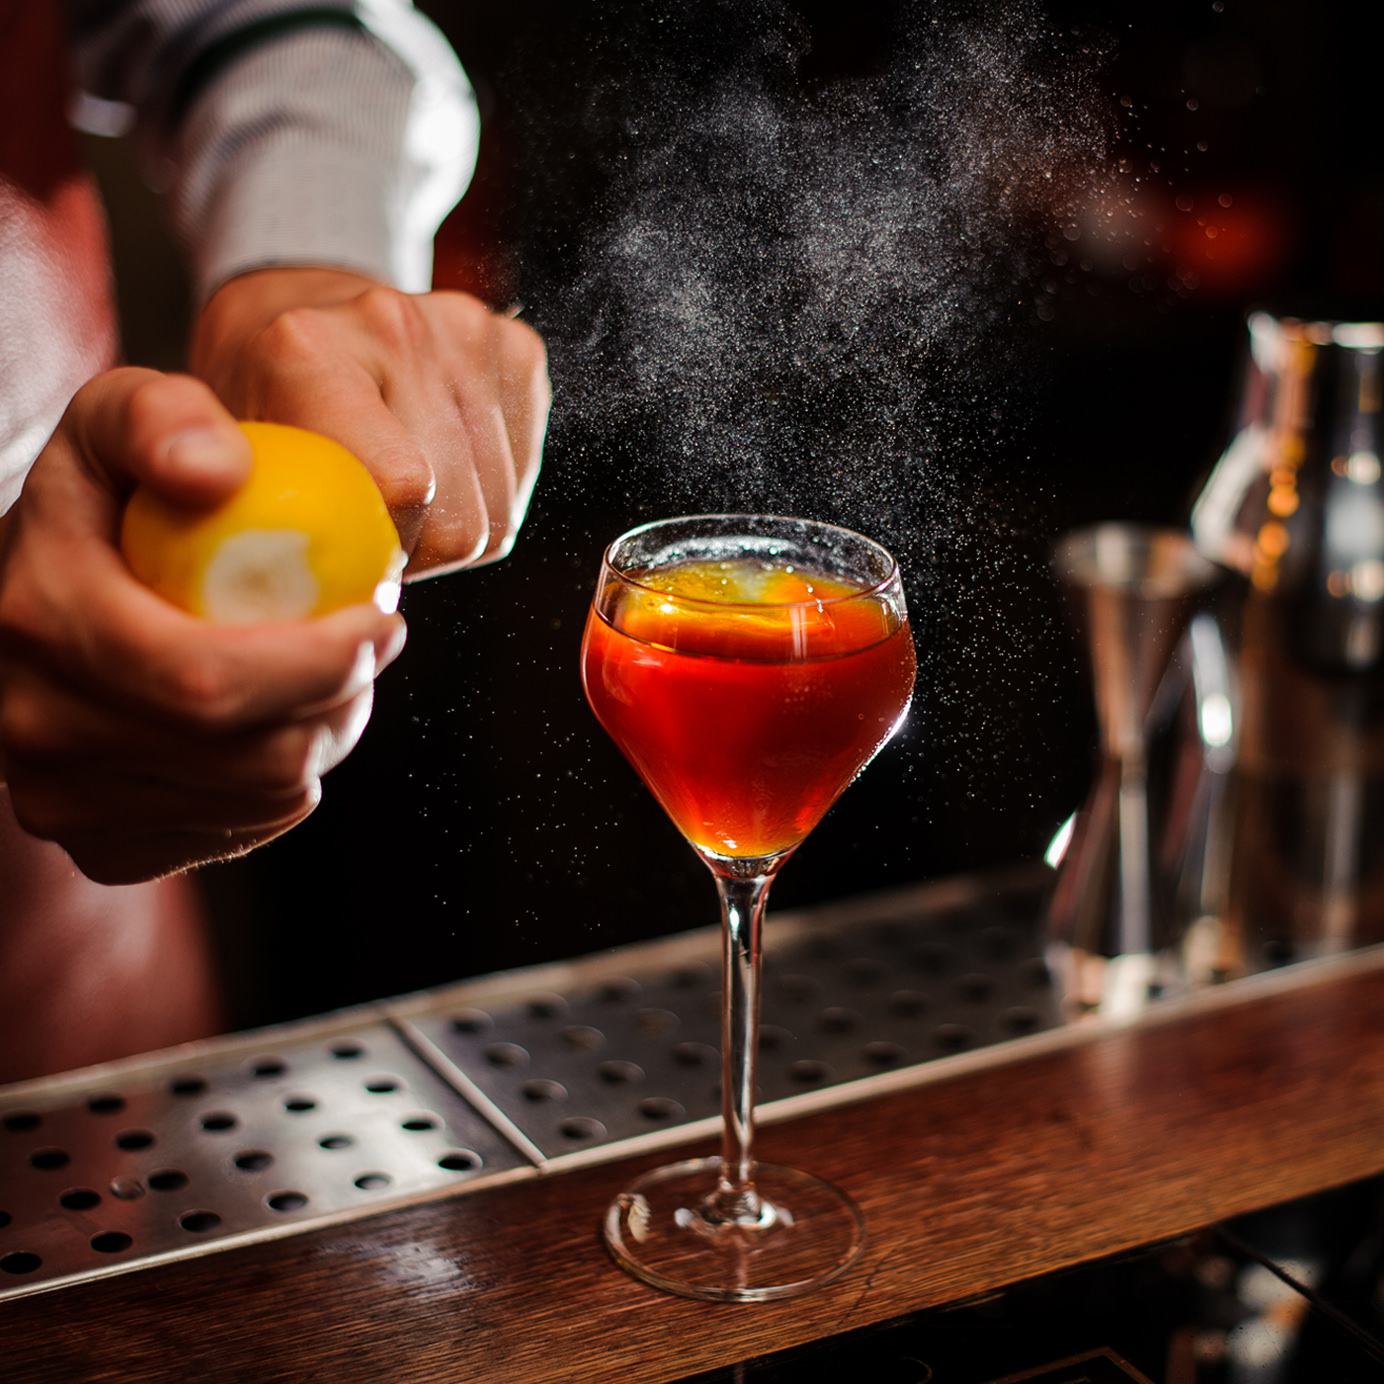 Can Sobriety Make You a Better Bartender?